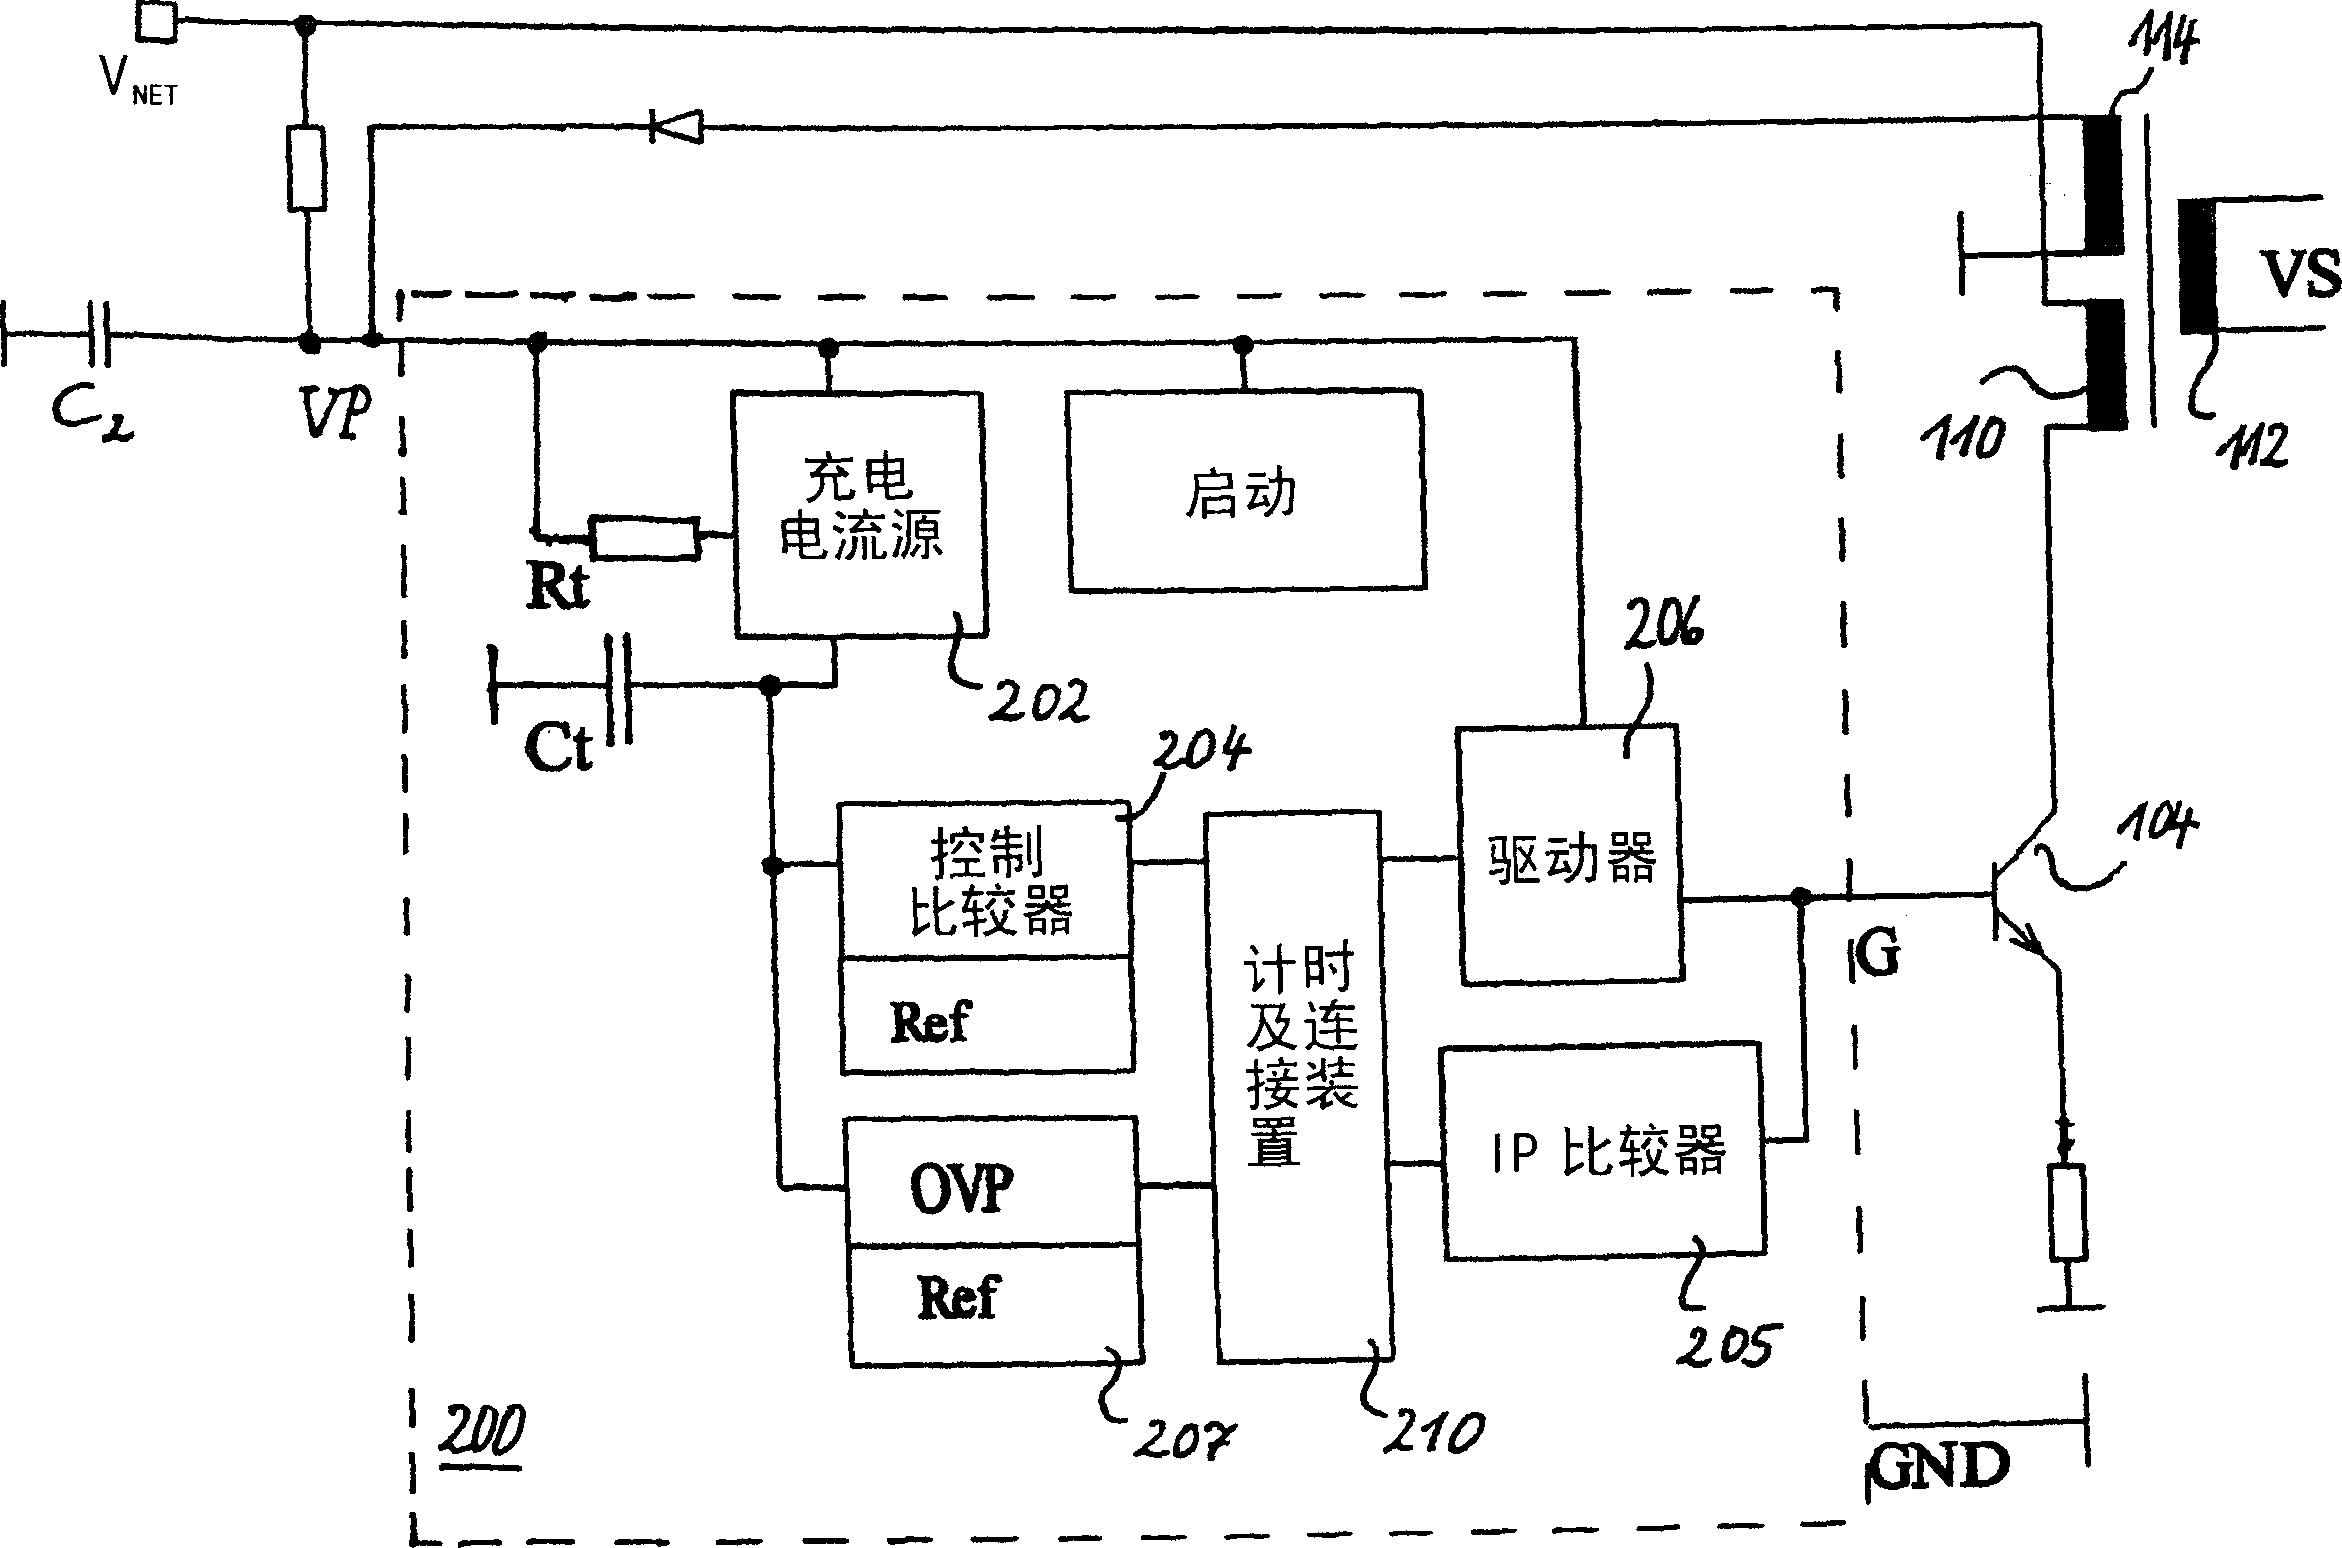 Control circuit for the switch in a switching power supply